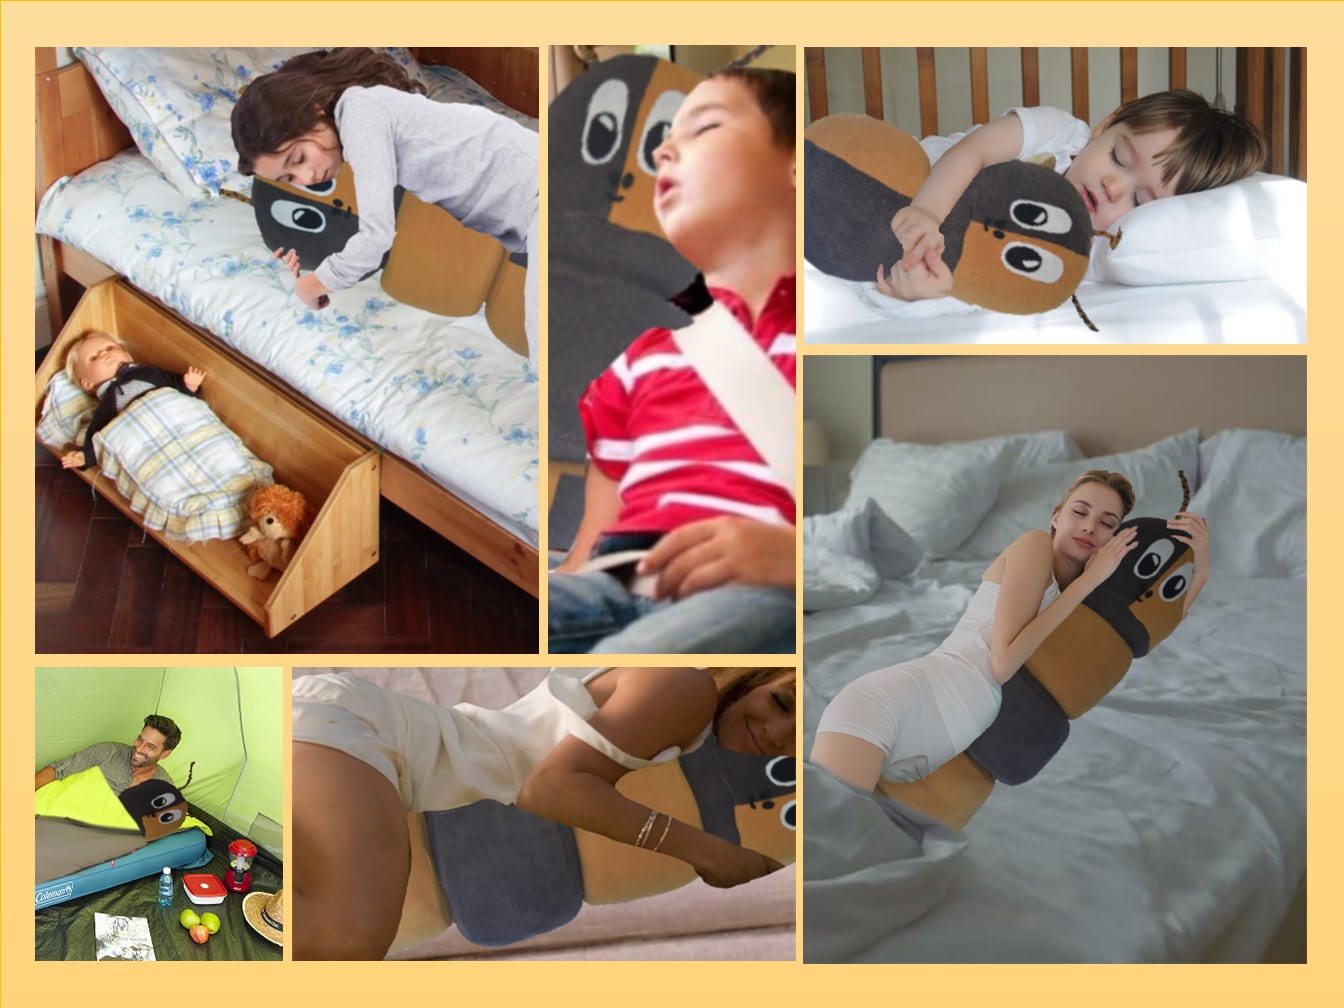 The Cattapillow is designed with the user in mind. Cattapillow can be used from young age, growing up with the users. From car journeys to pregnancy and more, Cattapillow will be by your side.